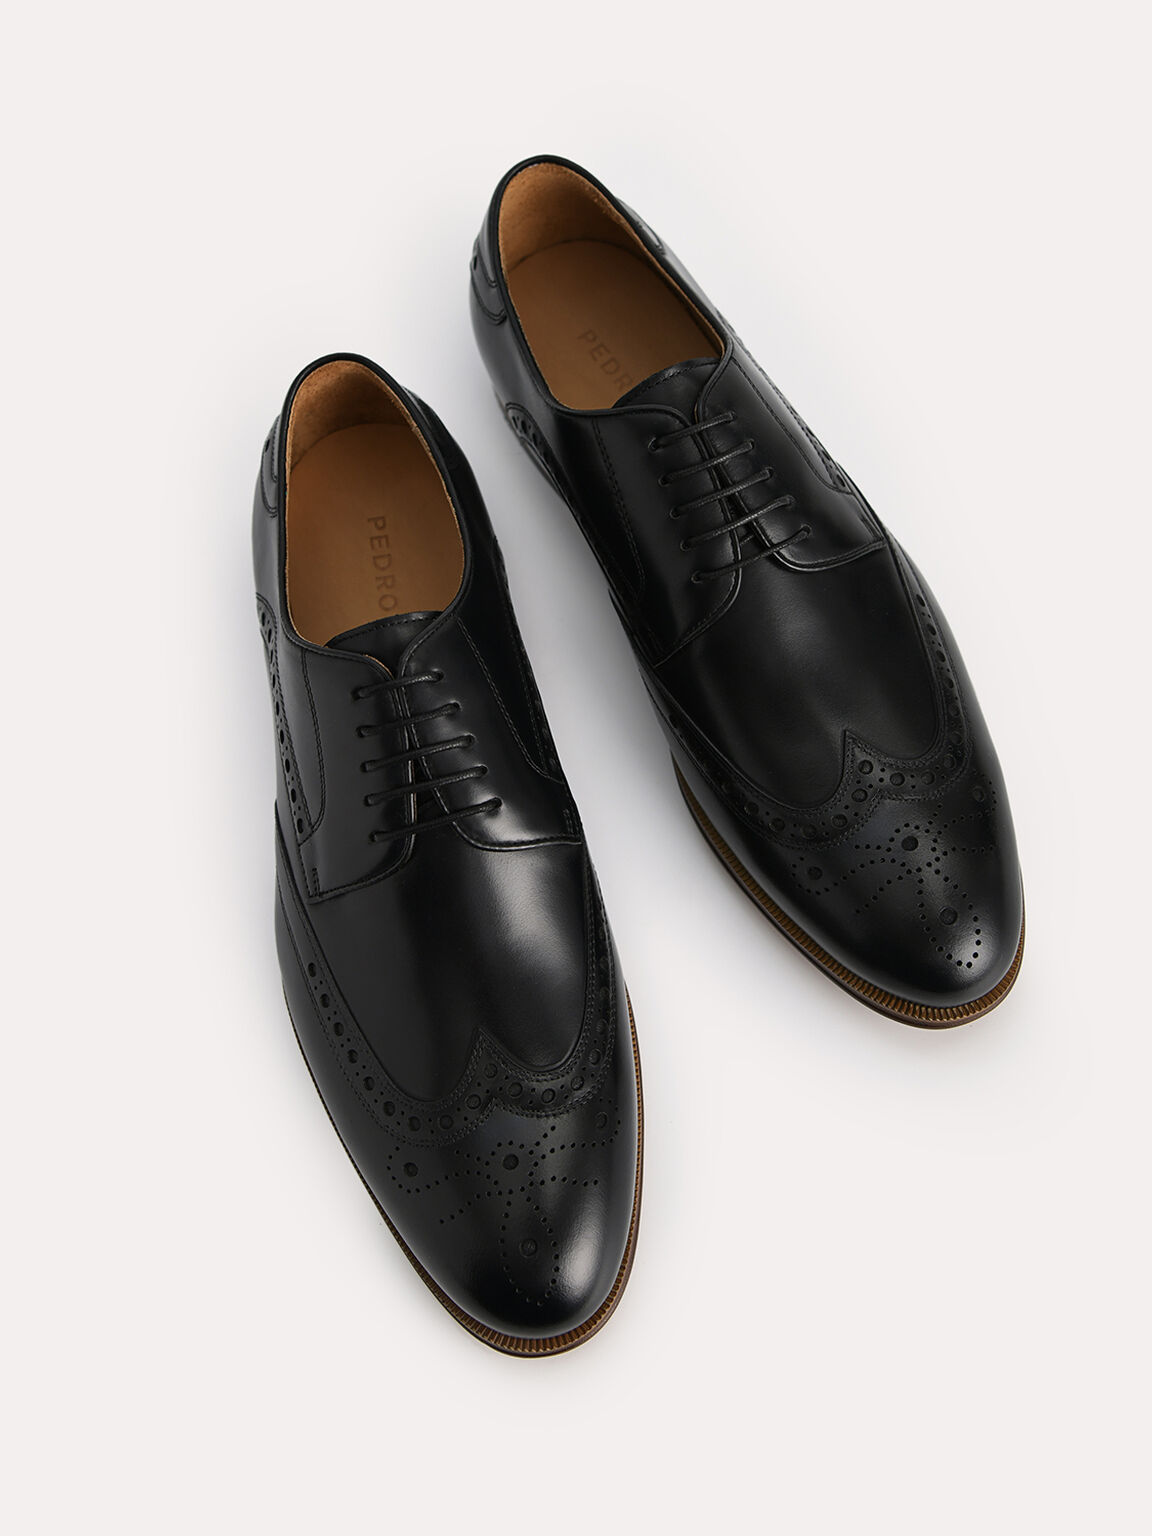 Leather Brogues, Black